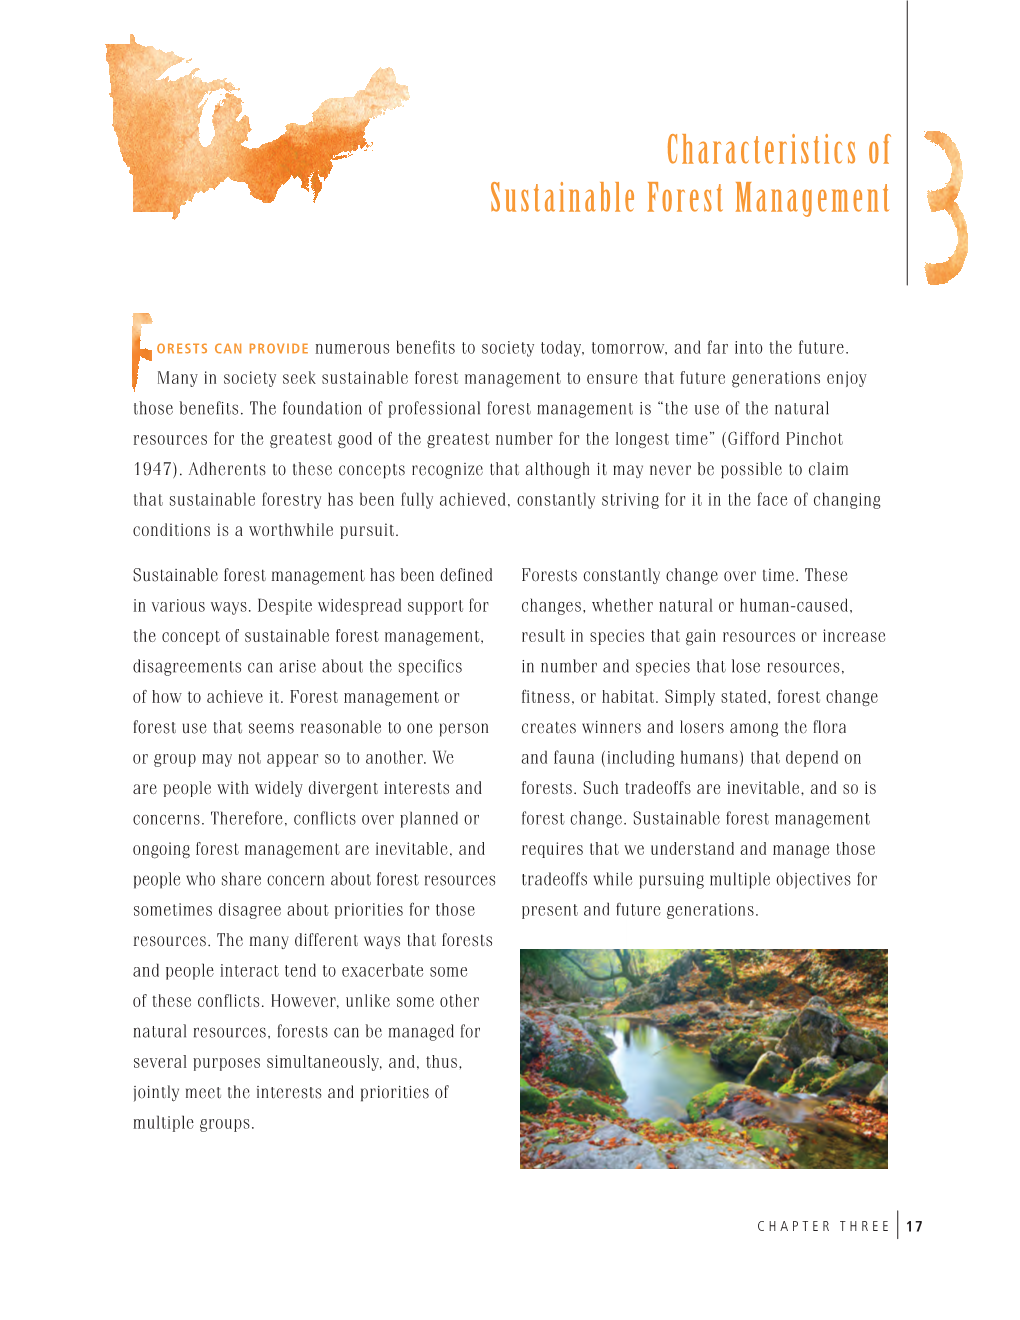 Characteristics of Sustainable Forest Management